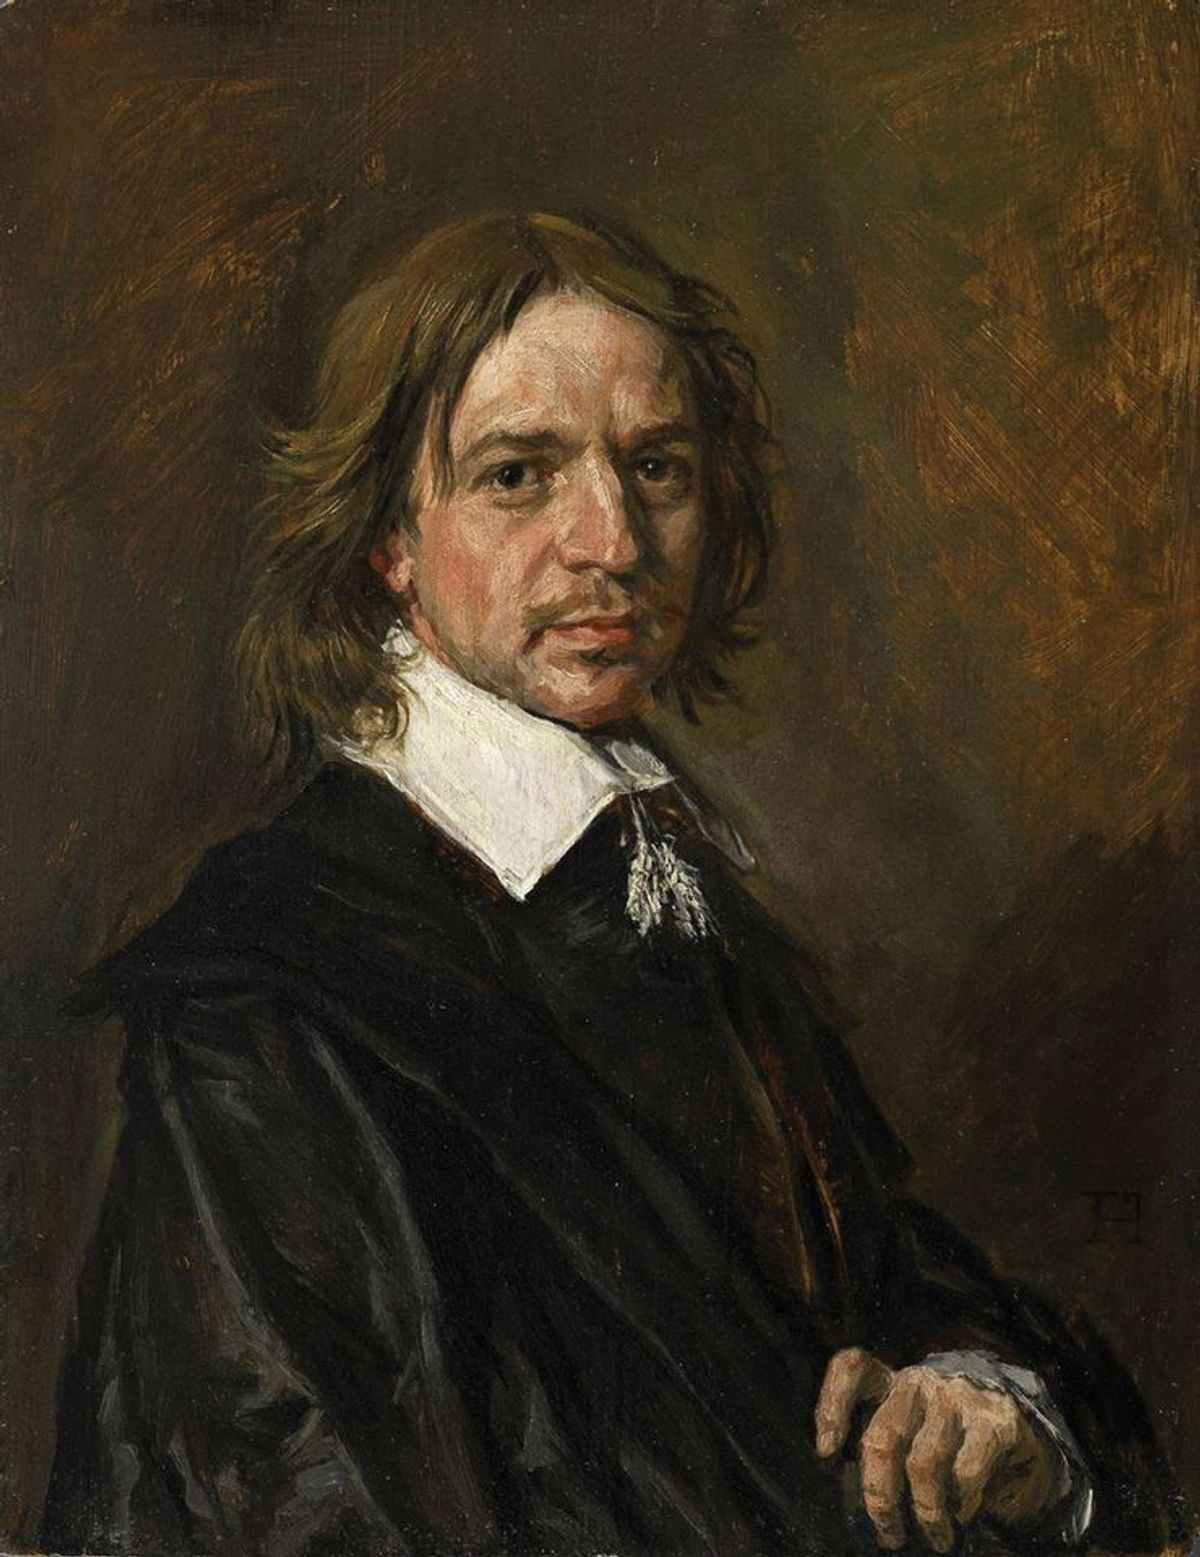 Scientific analysis of the portrait of an unknown man revealed two modern pigments Sotheby's